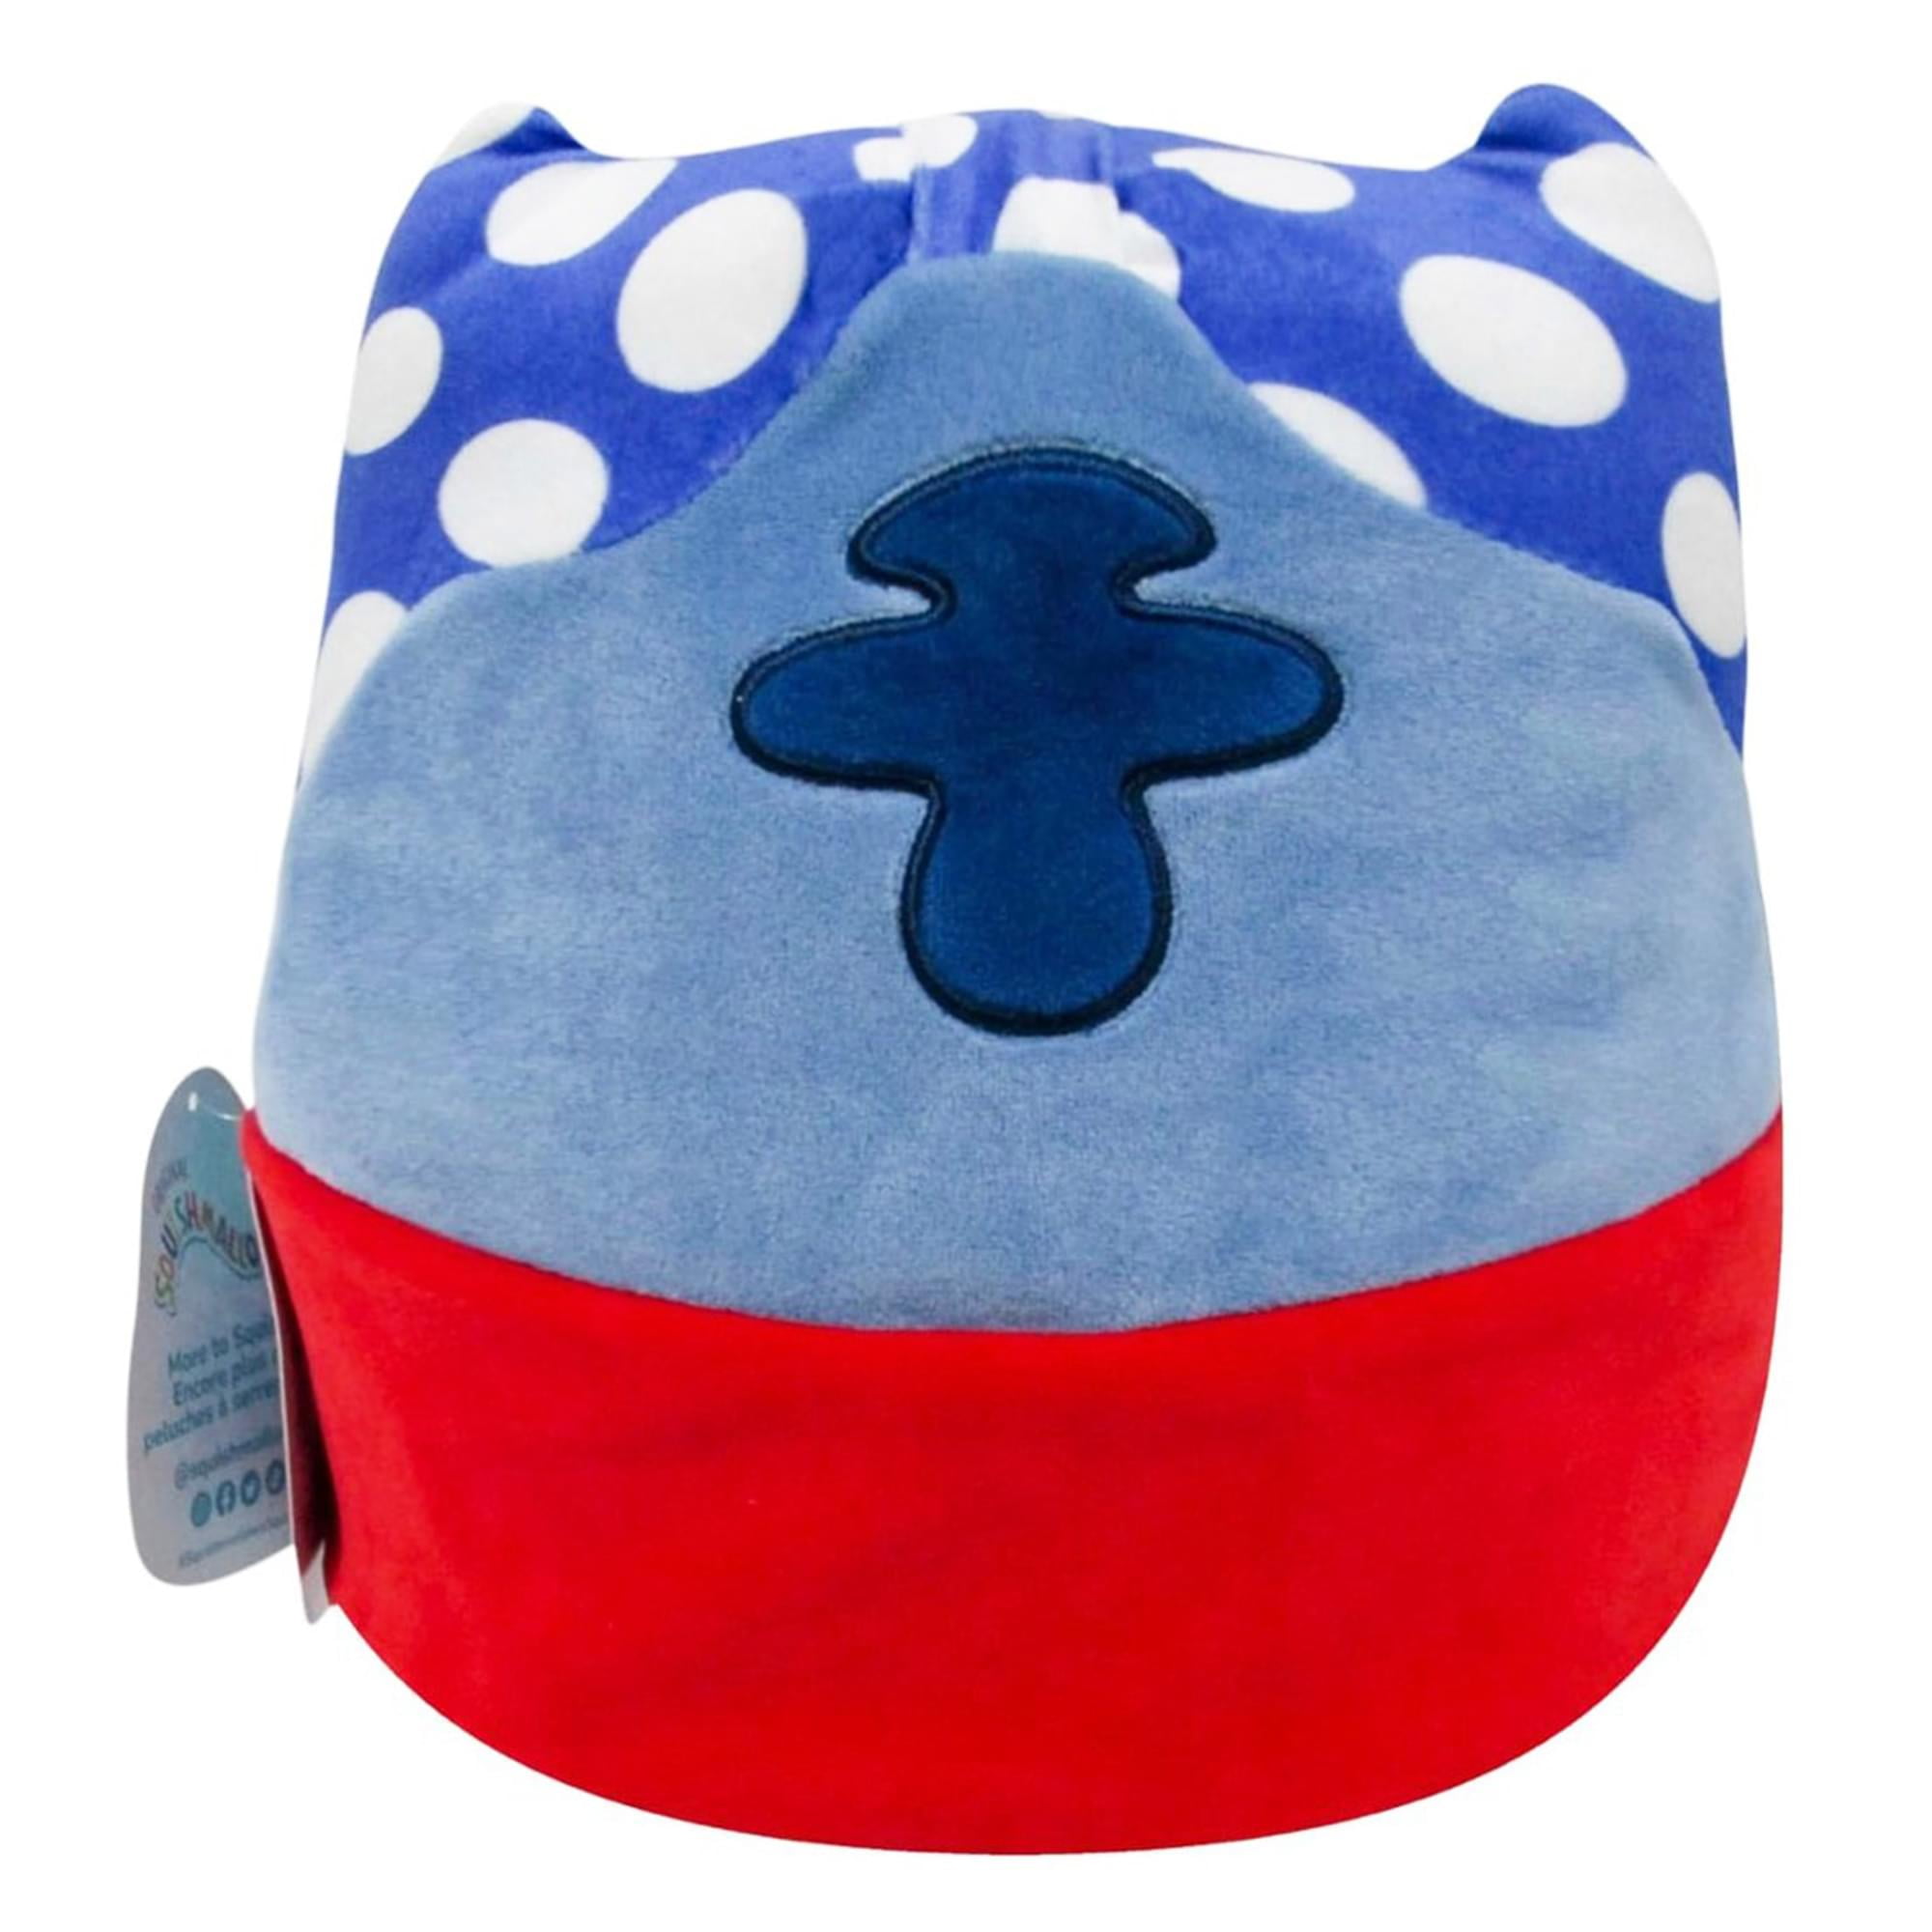 Squishmallows Stitch in Super Hero Suit 8 inch Super Soft Kellytoy Plush, Red